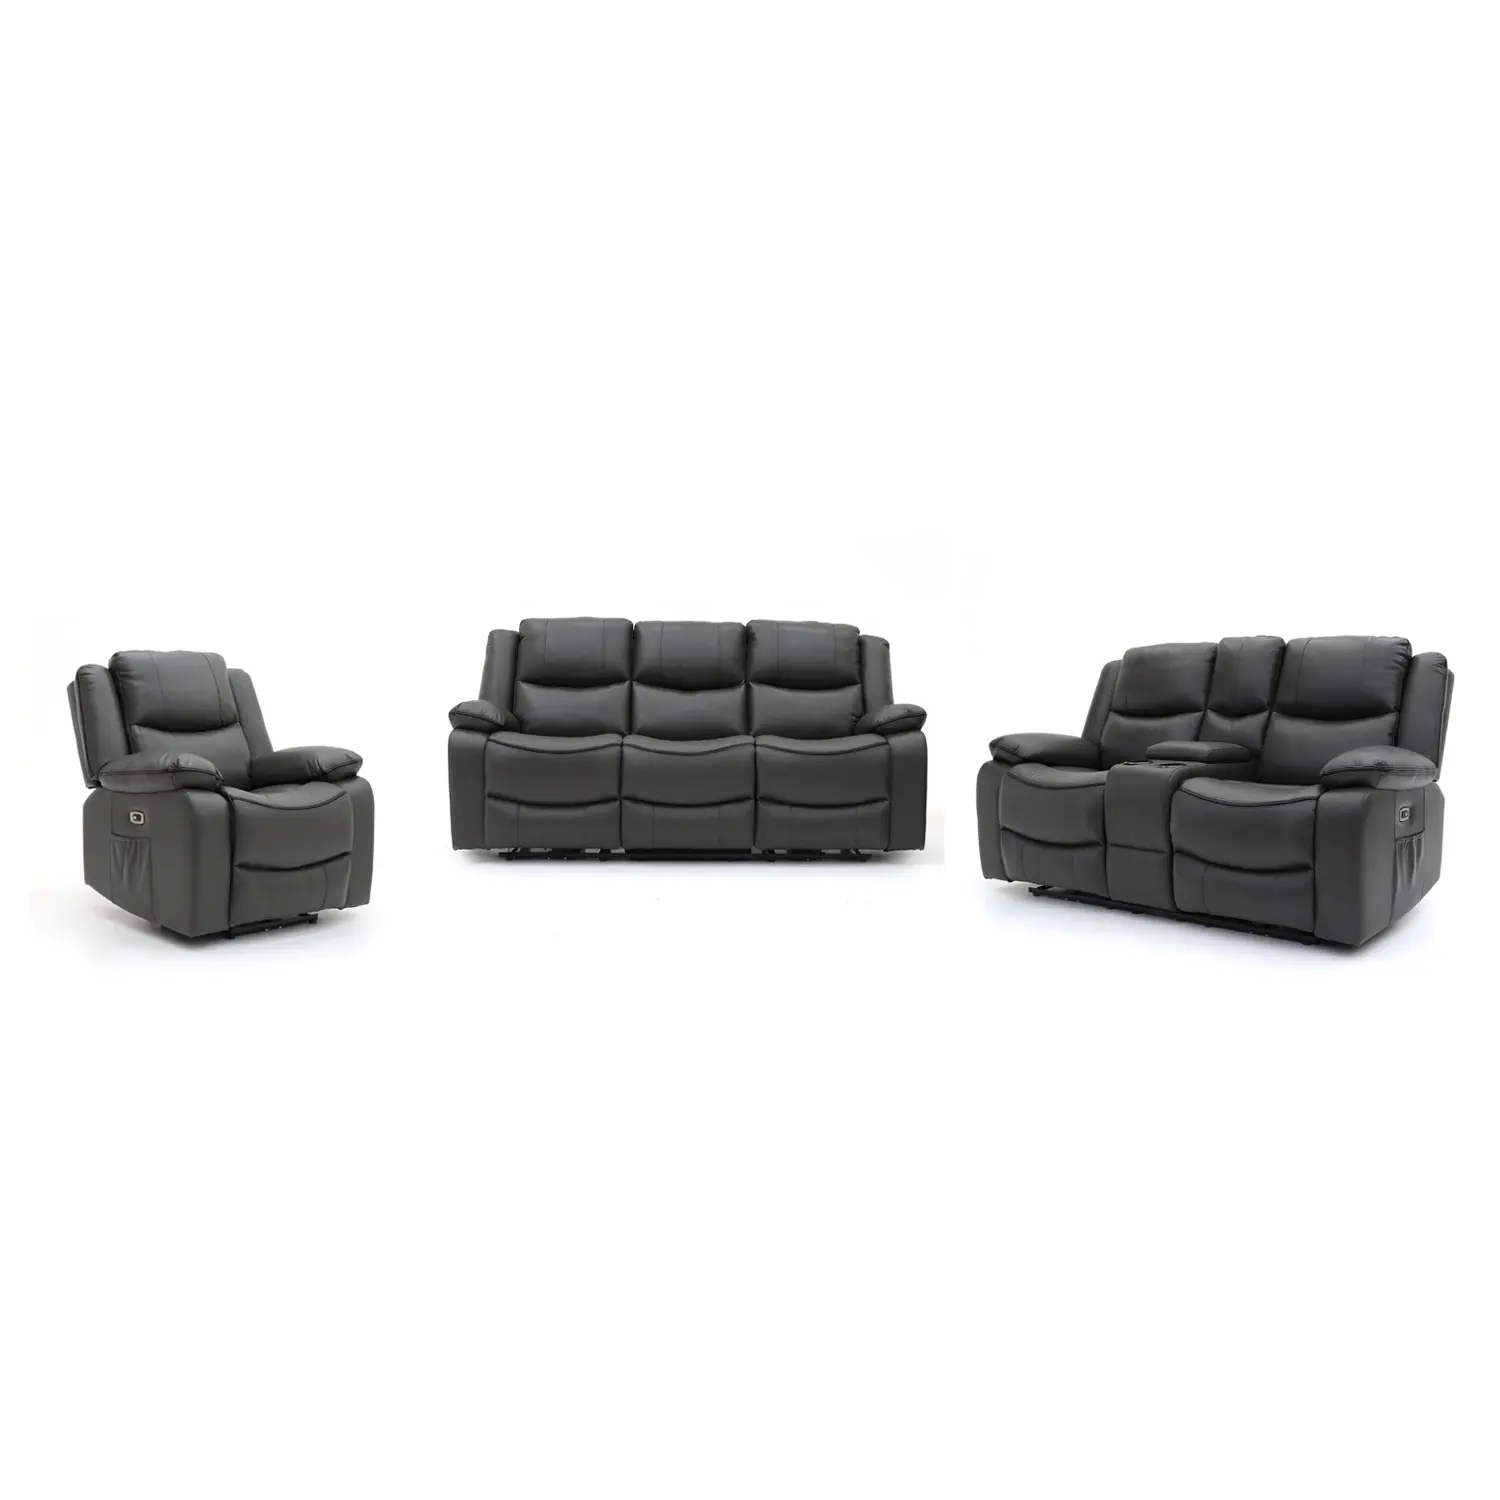 Geeksofa 3+2+1 Modern Air Leather Power Electric Motion Recliner Sofa Set With Console And Massage For Living Room Furniture